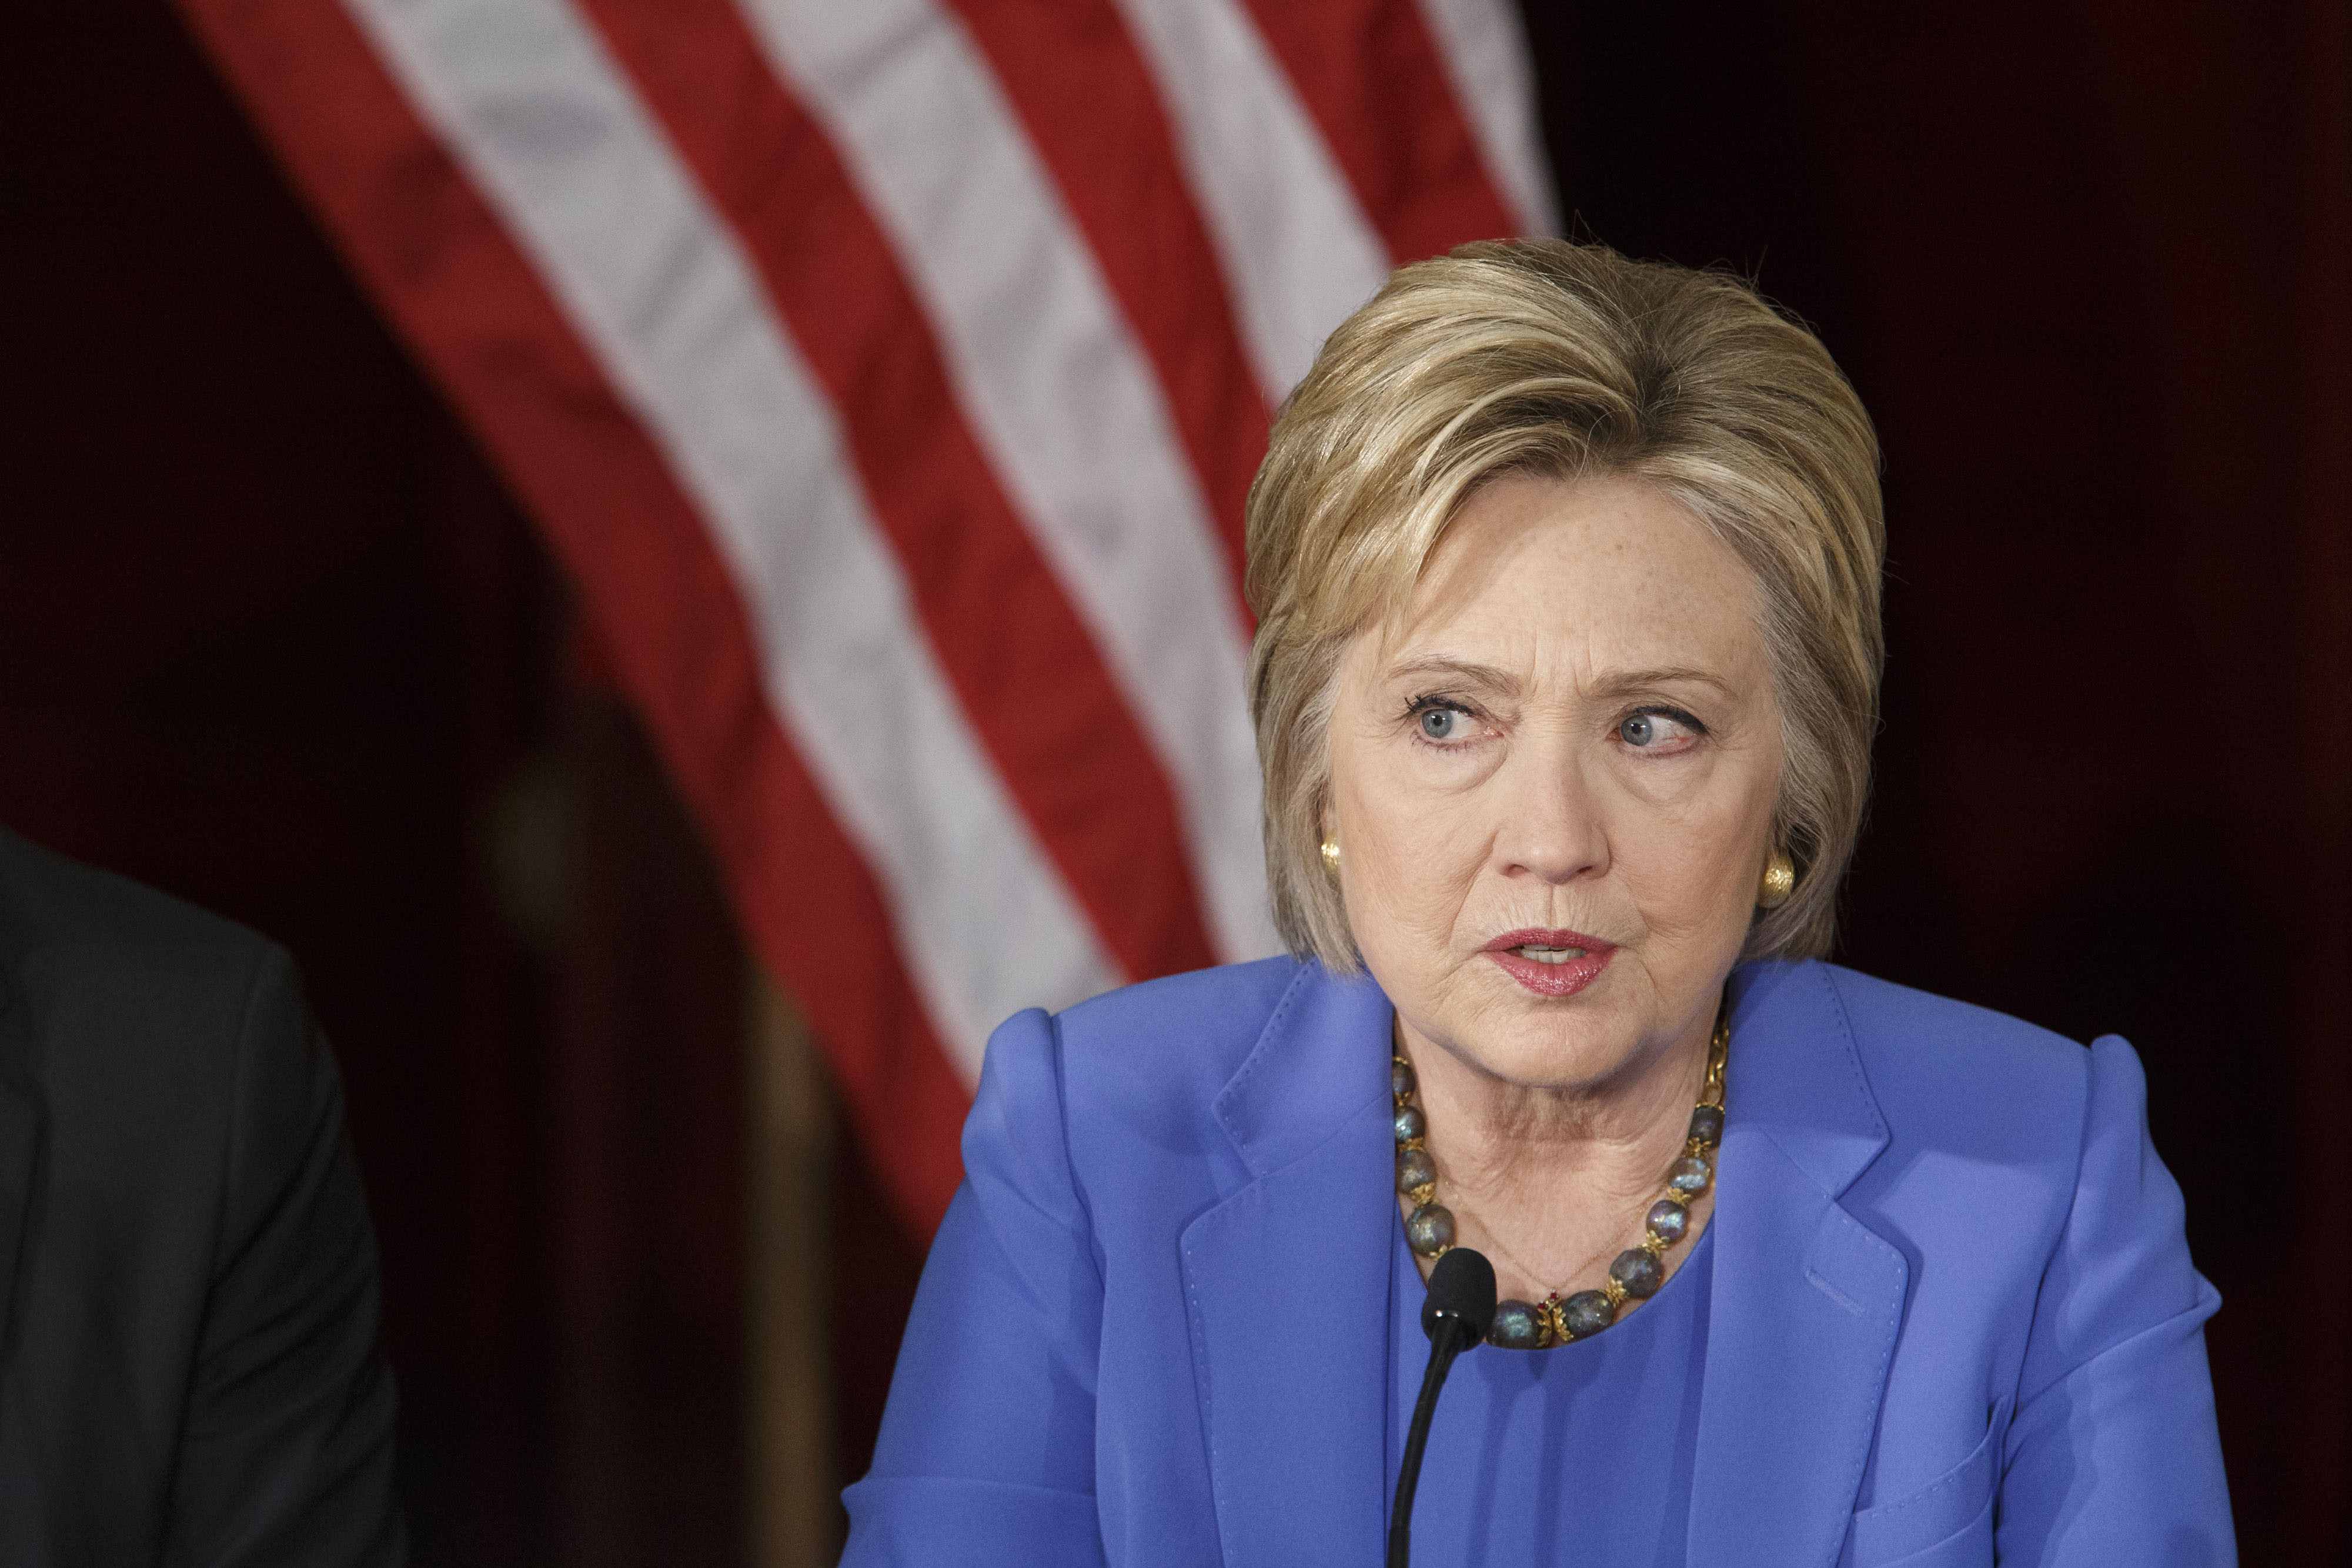 Presidential Candidate Hillary Clinton Attends A Round Table Event At The University Of Southern California